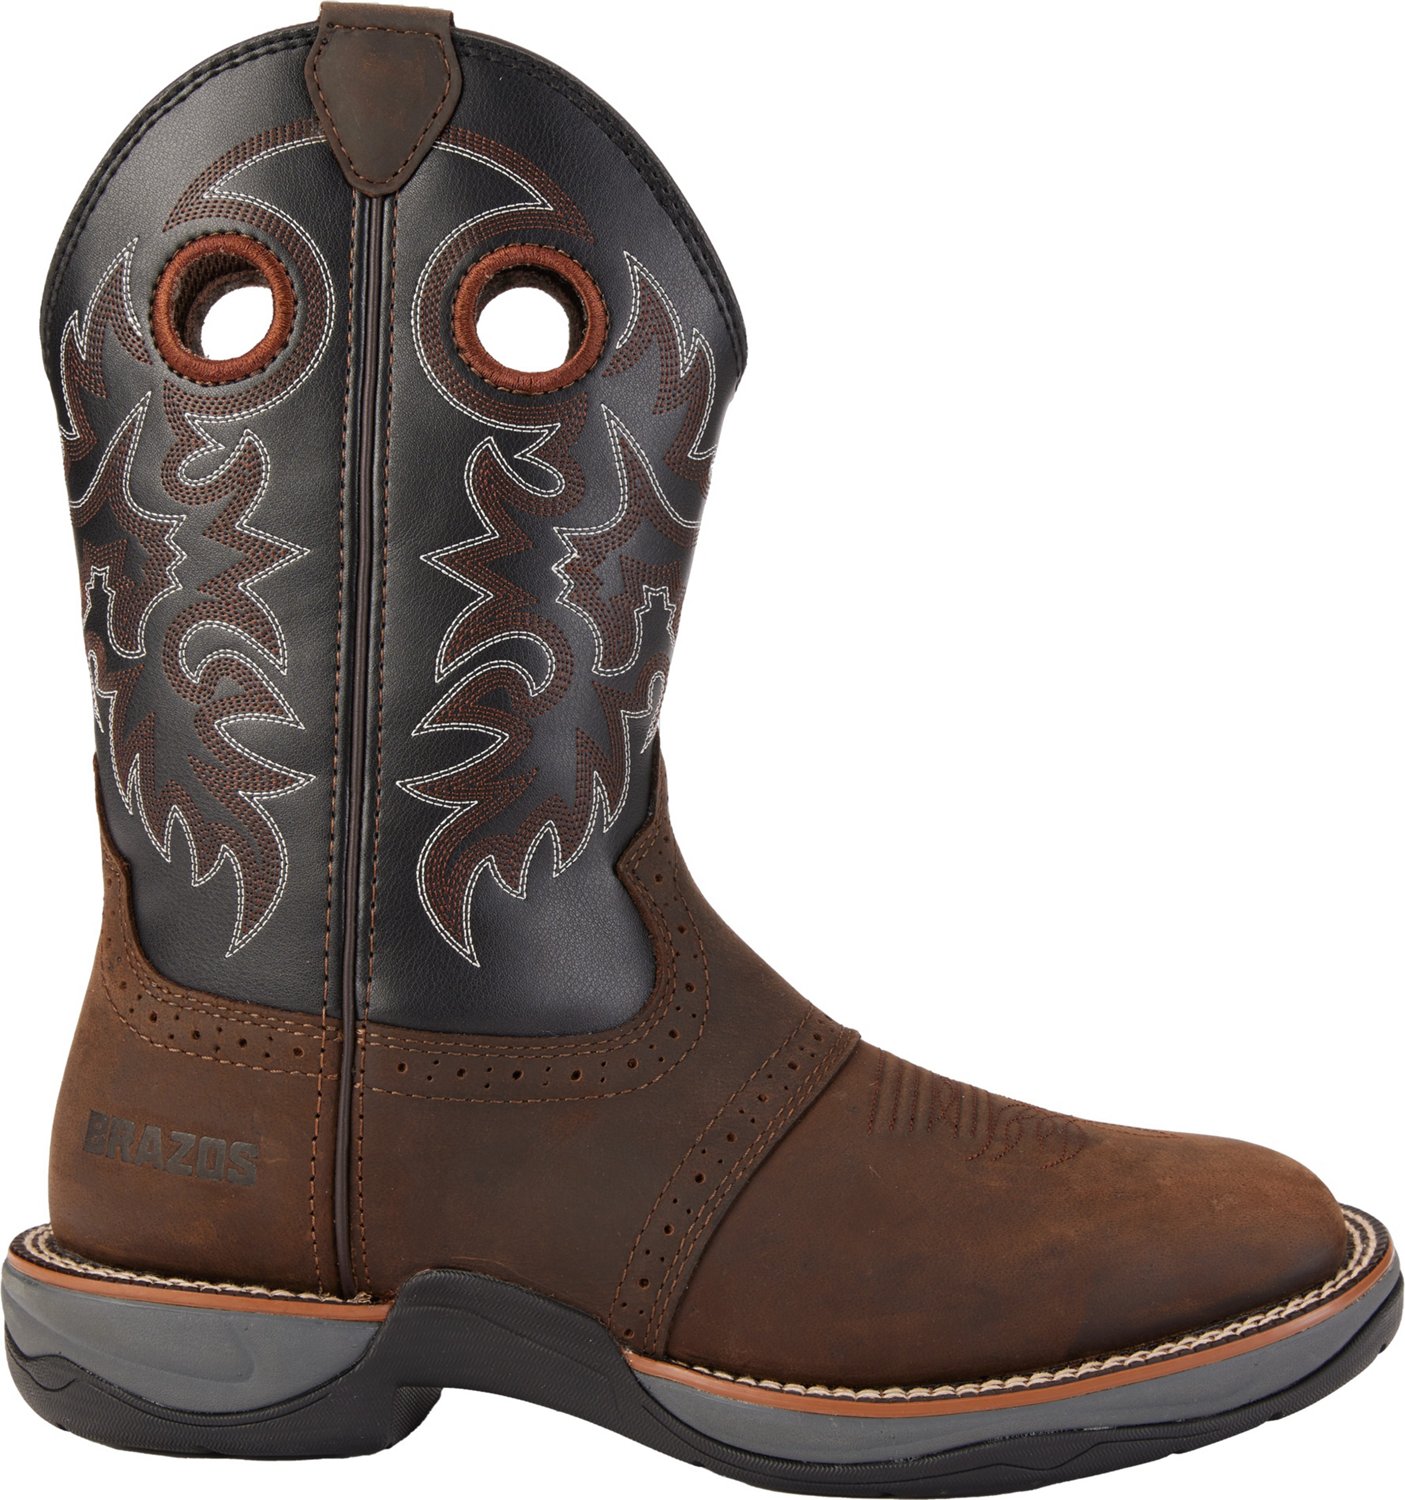 Brazos Men's Amarillo 2.0 Western Wellington Work Boots                                                                          - view number 1 selected